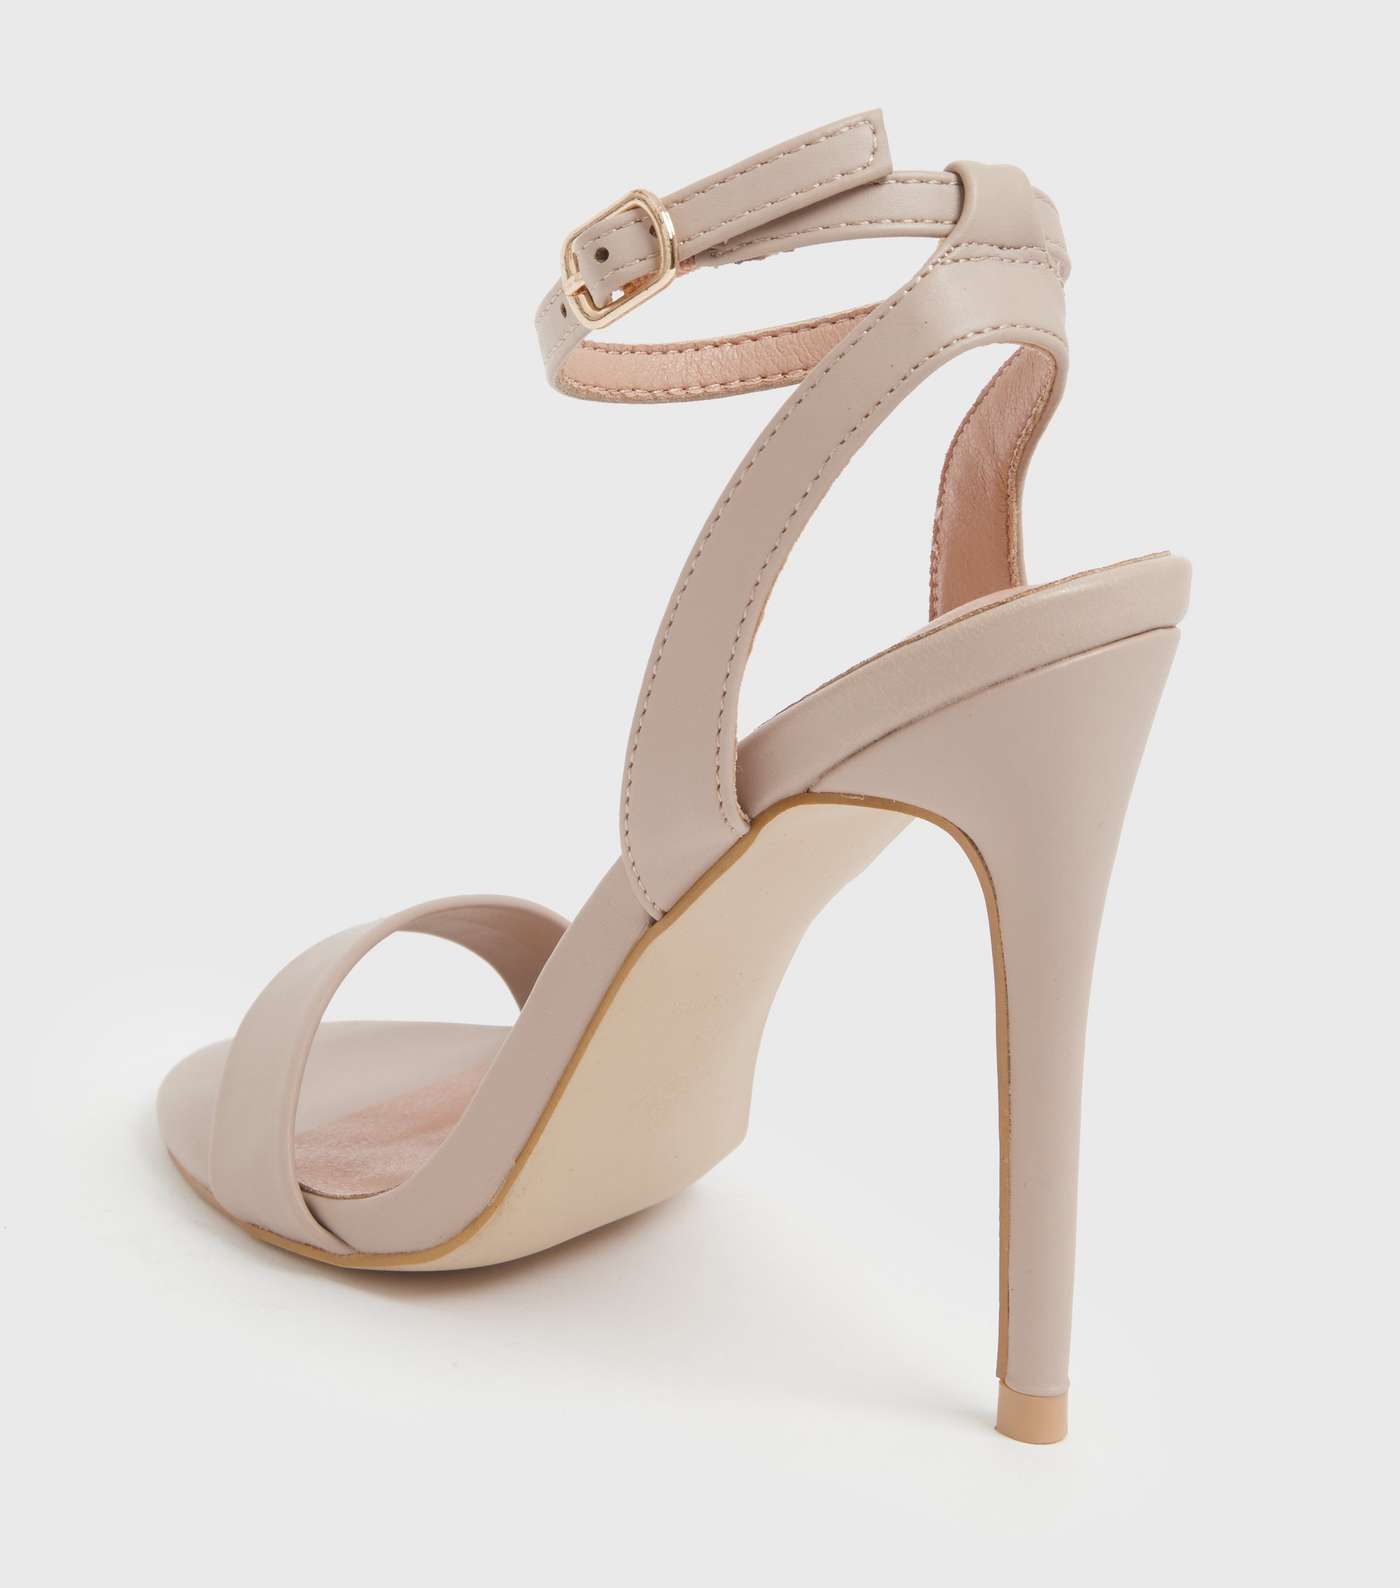 Pale Pink Leather-Look Stiletto Heel Sandals Image 4